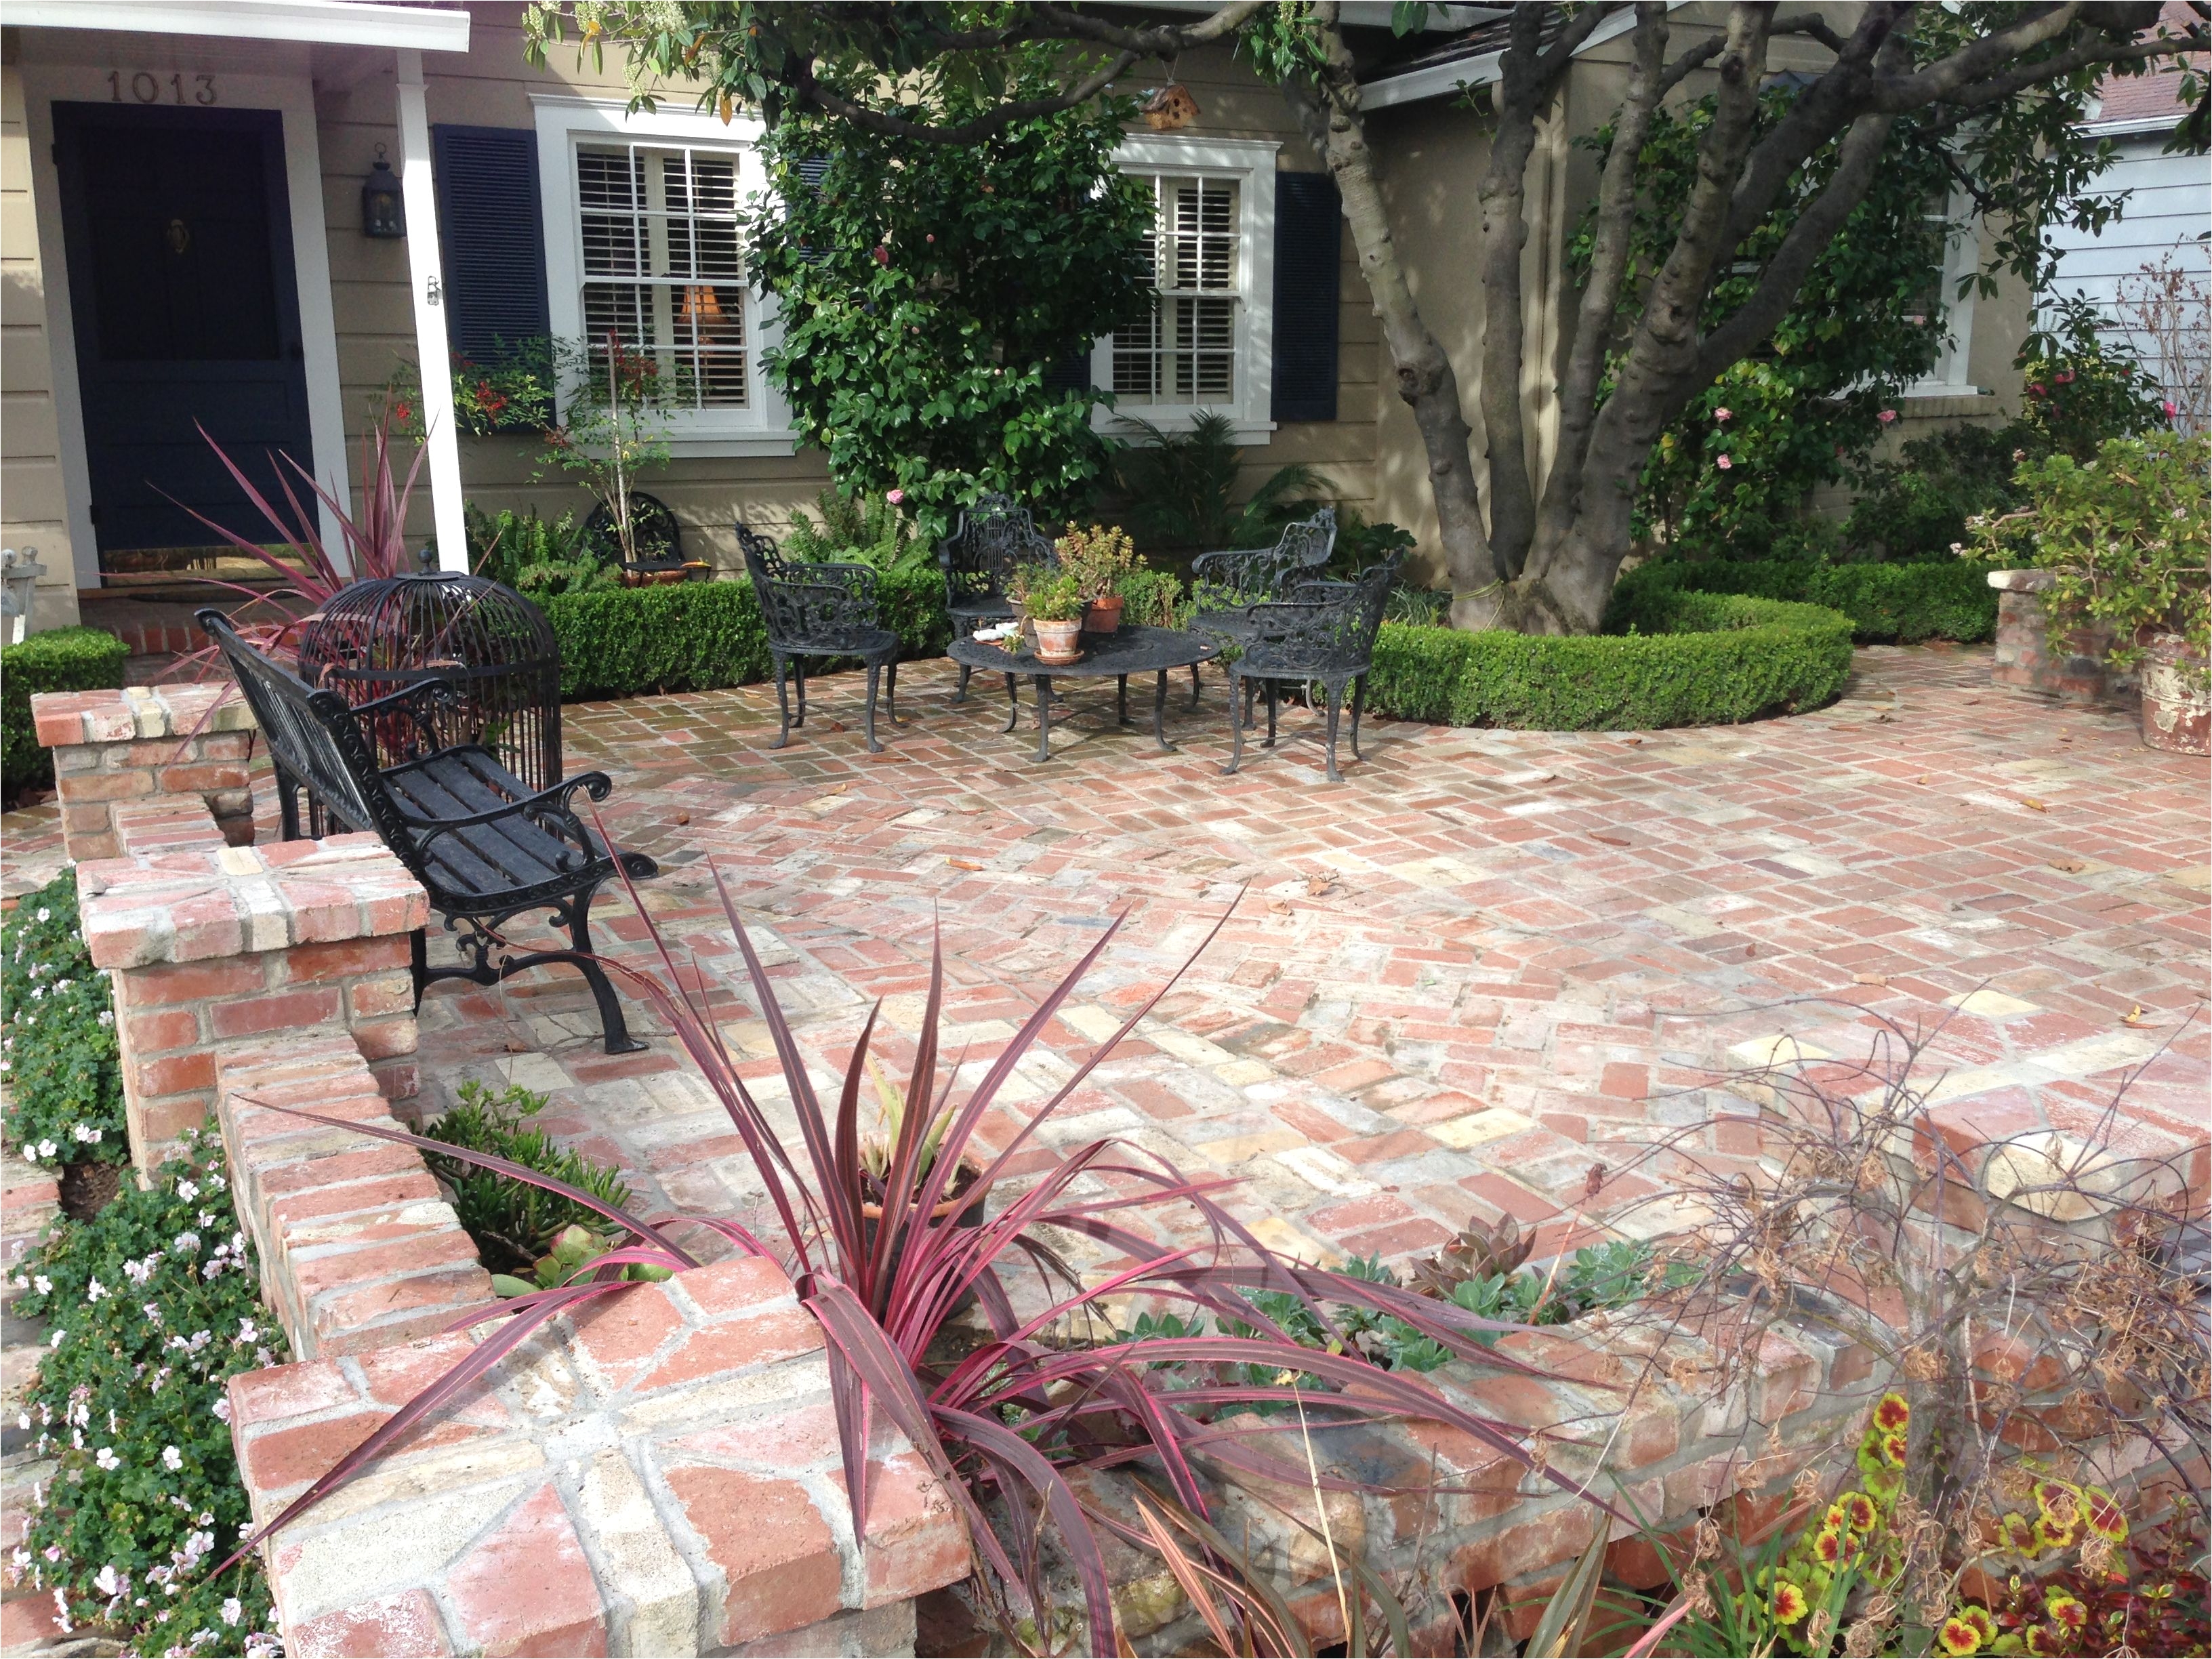 get front yard patio ideas at houselogic especially if you have a small yard installing a patio can make the most of your space for a modest cost